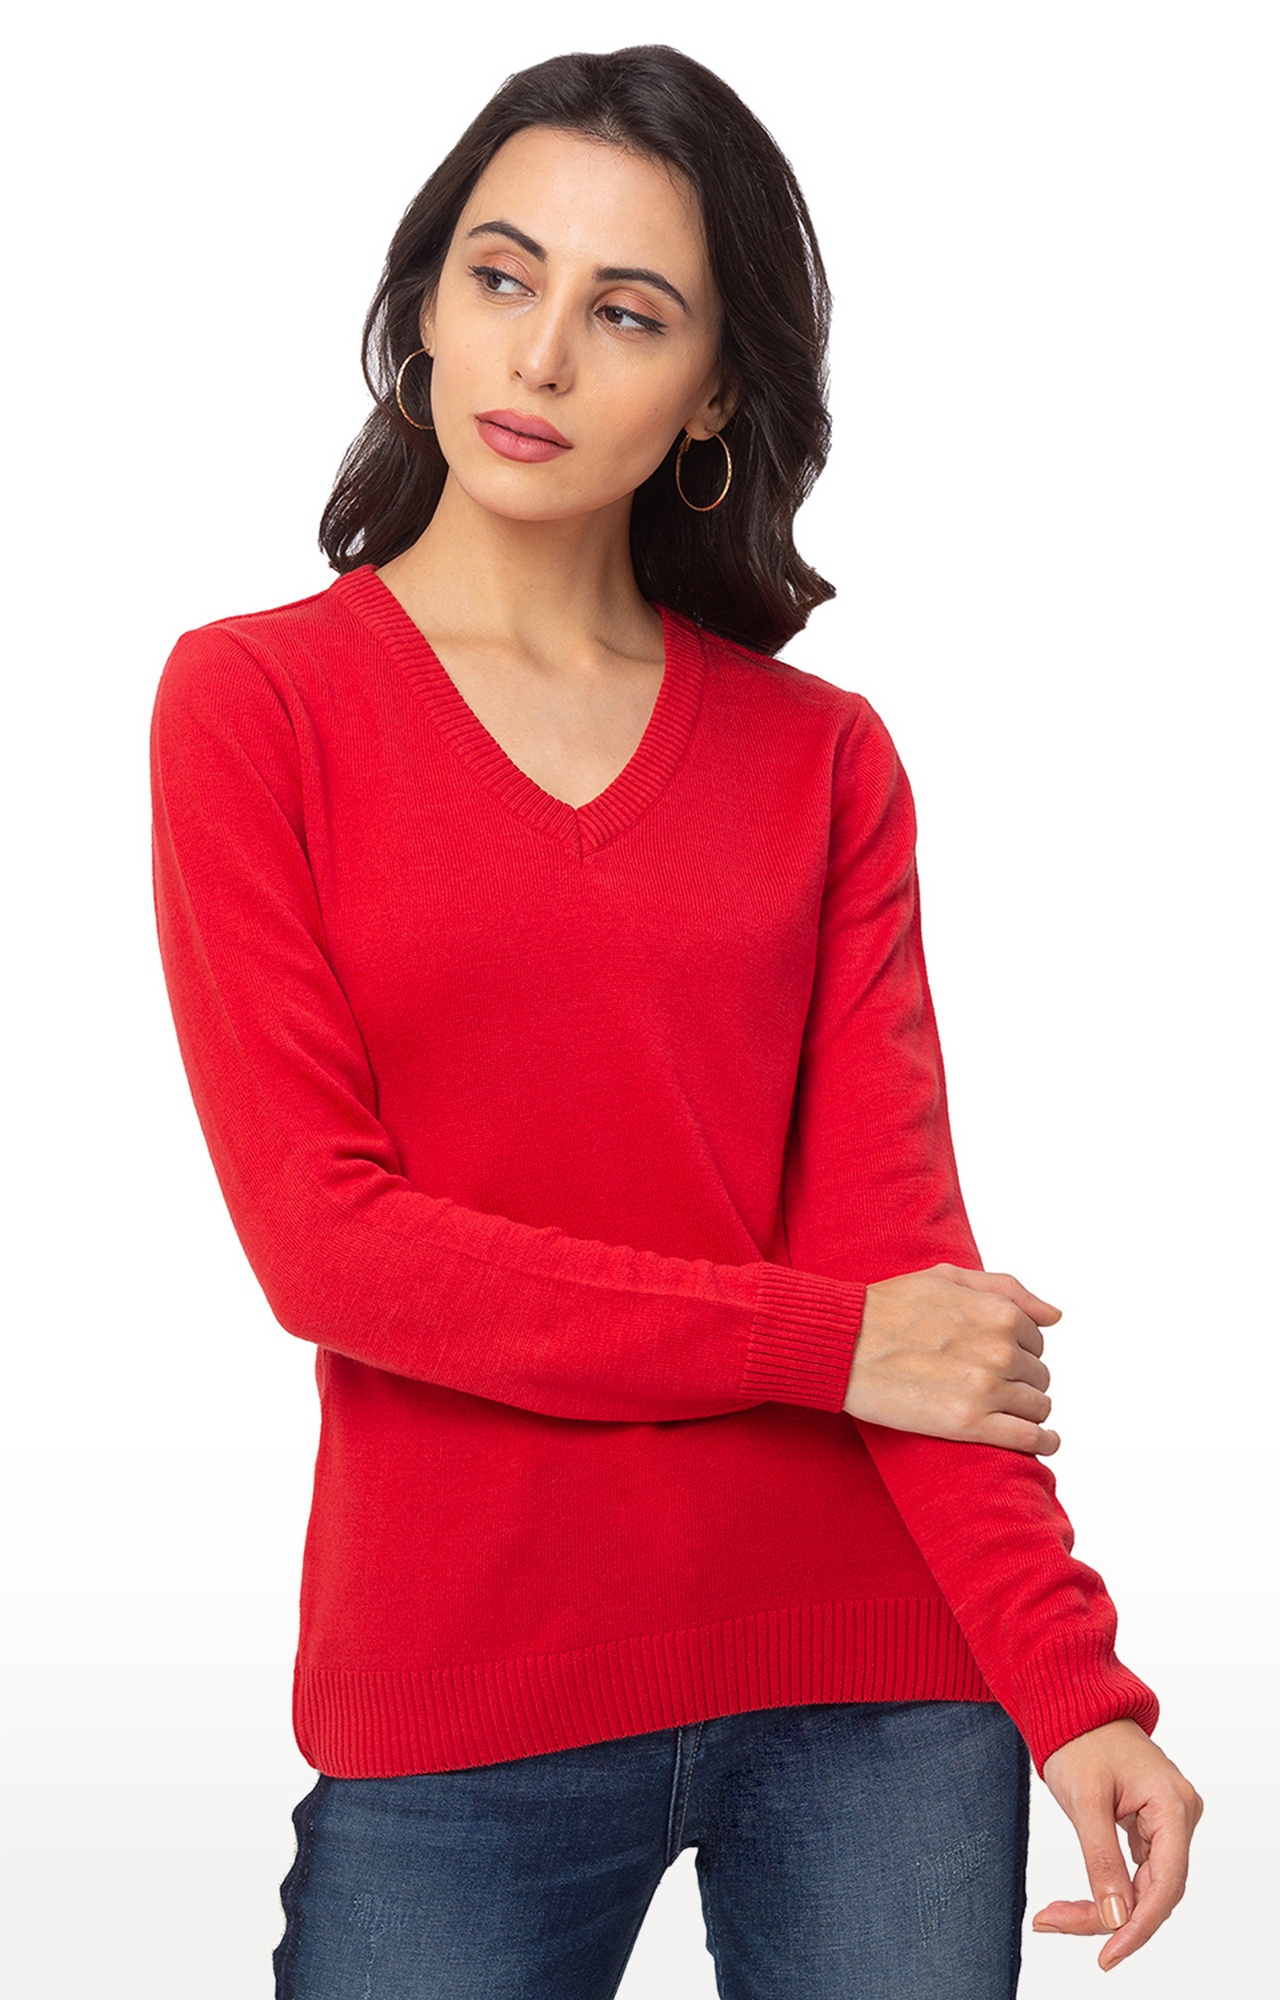 globus | Red Solid Sweater 0